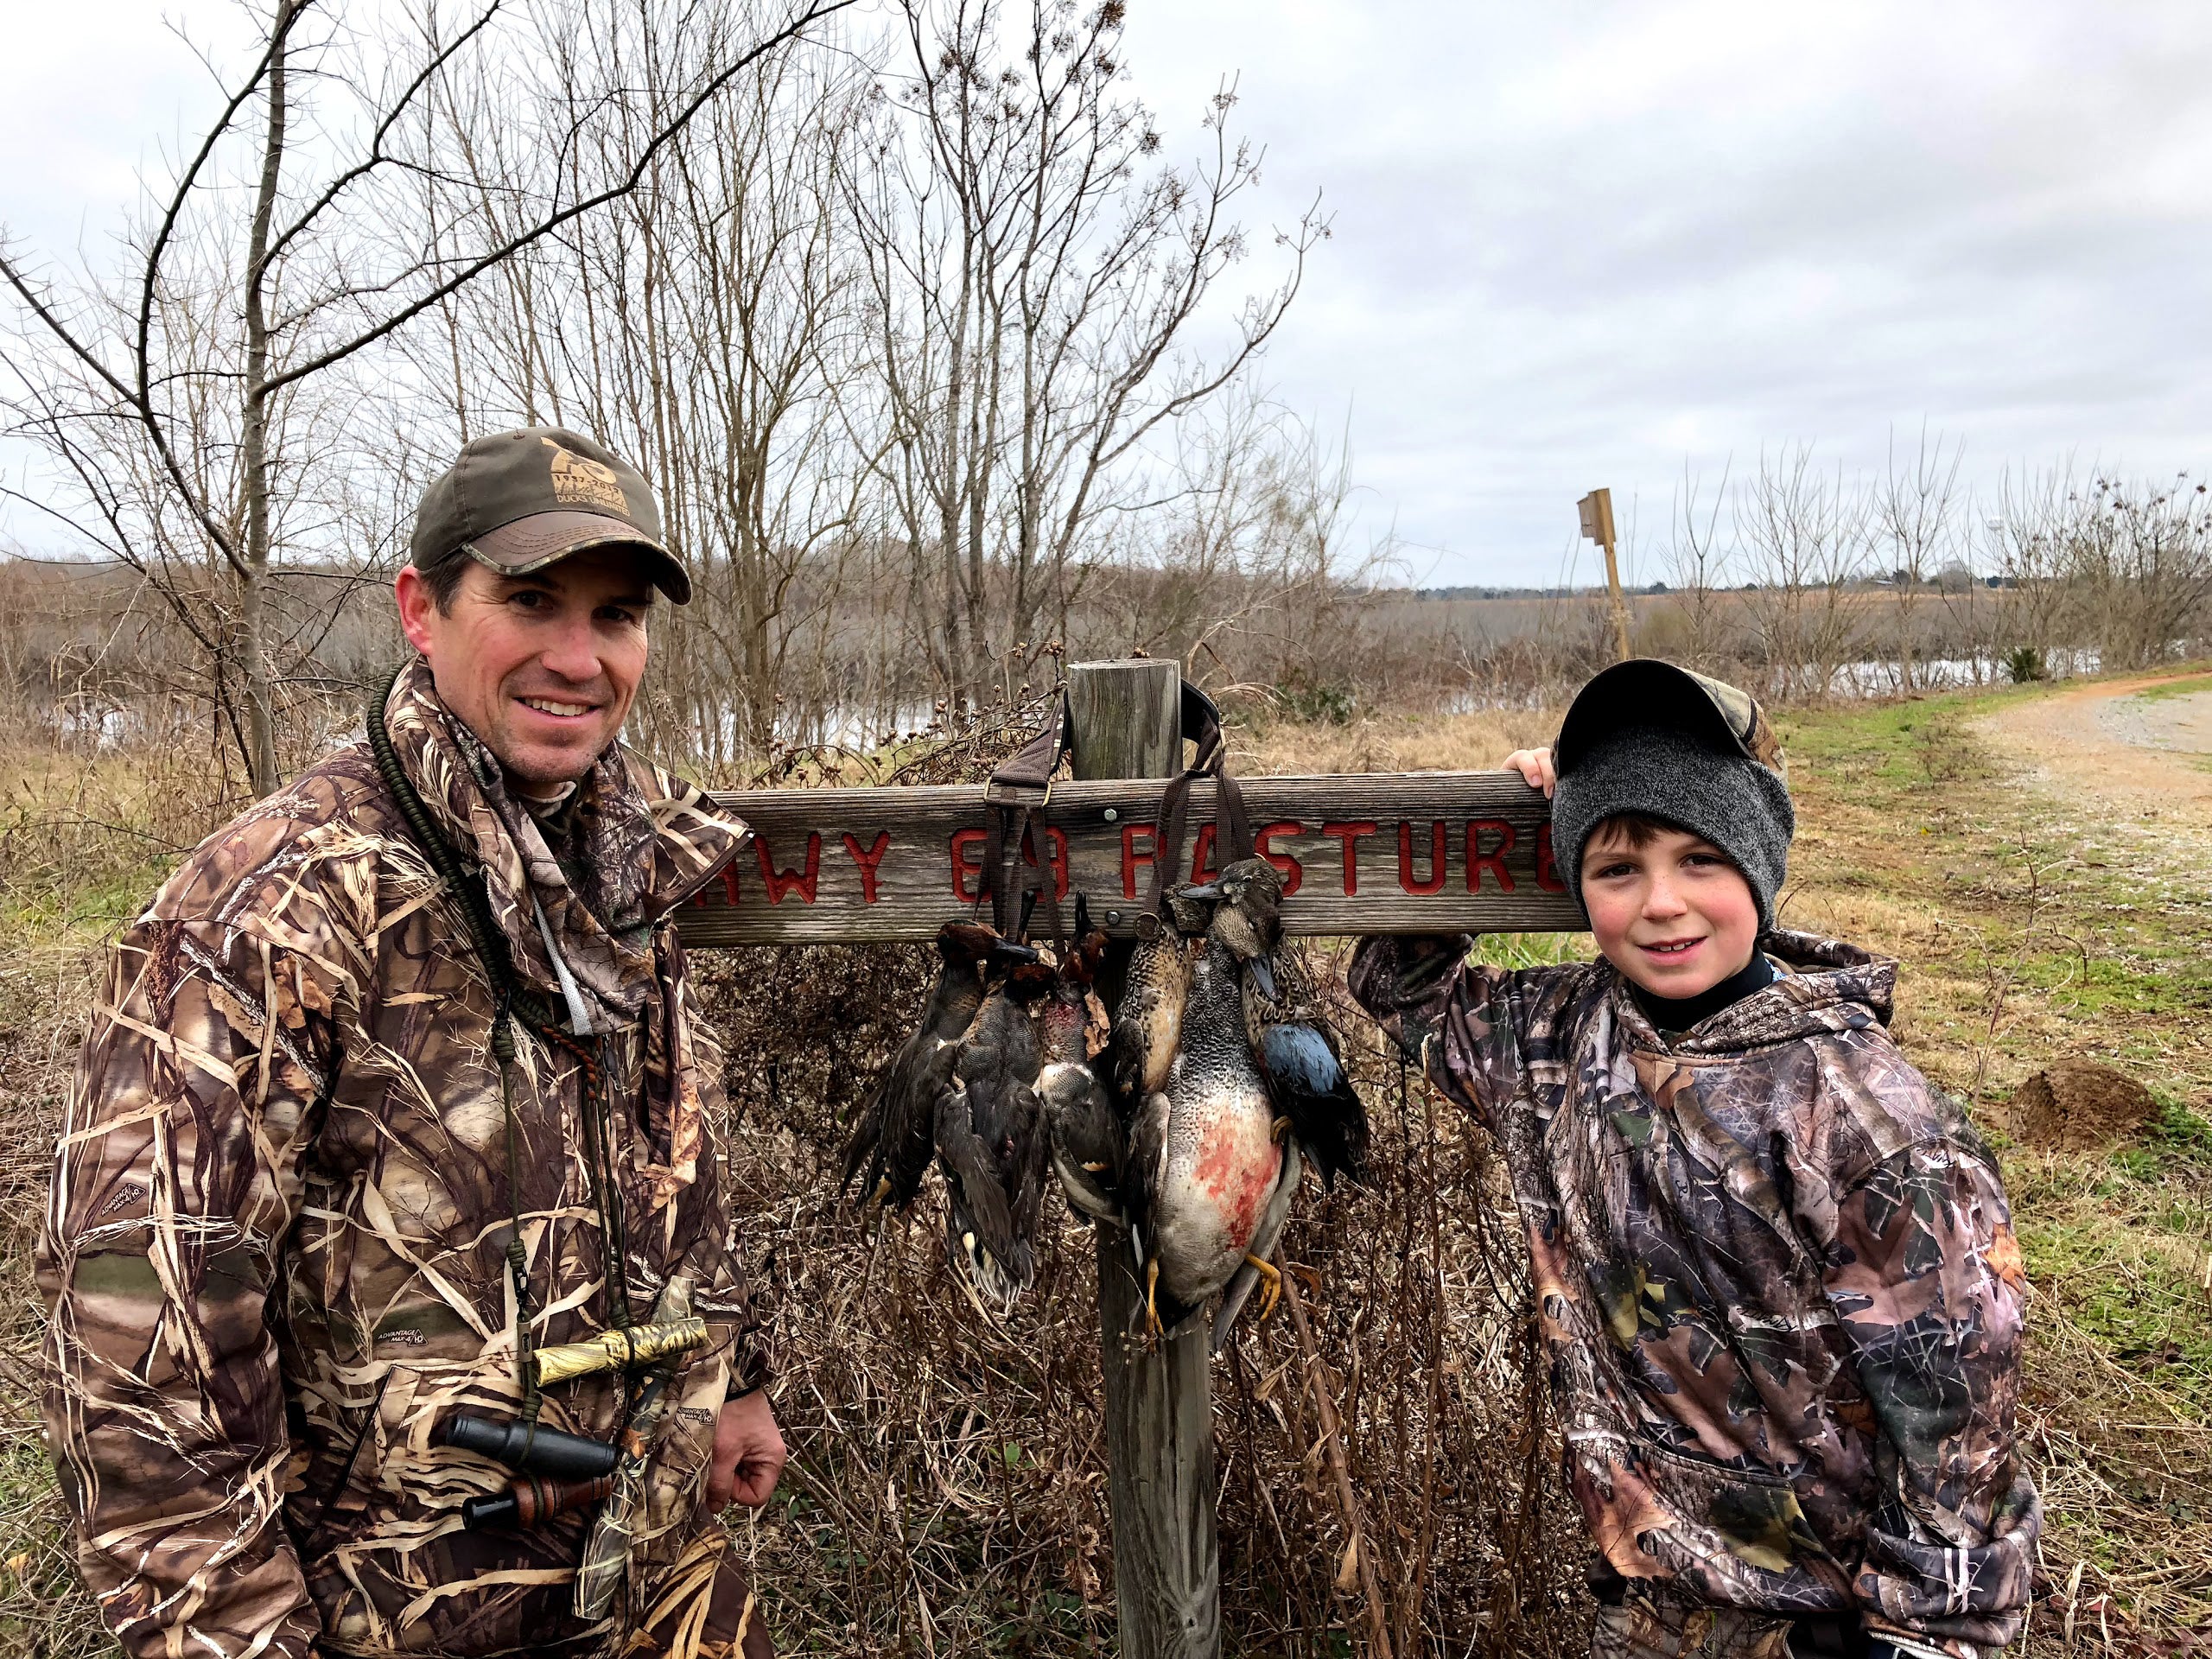 Phil and John Cowley from Seale, Alabama, participated in a FWFTA youth duck hunt in 2018.